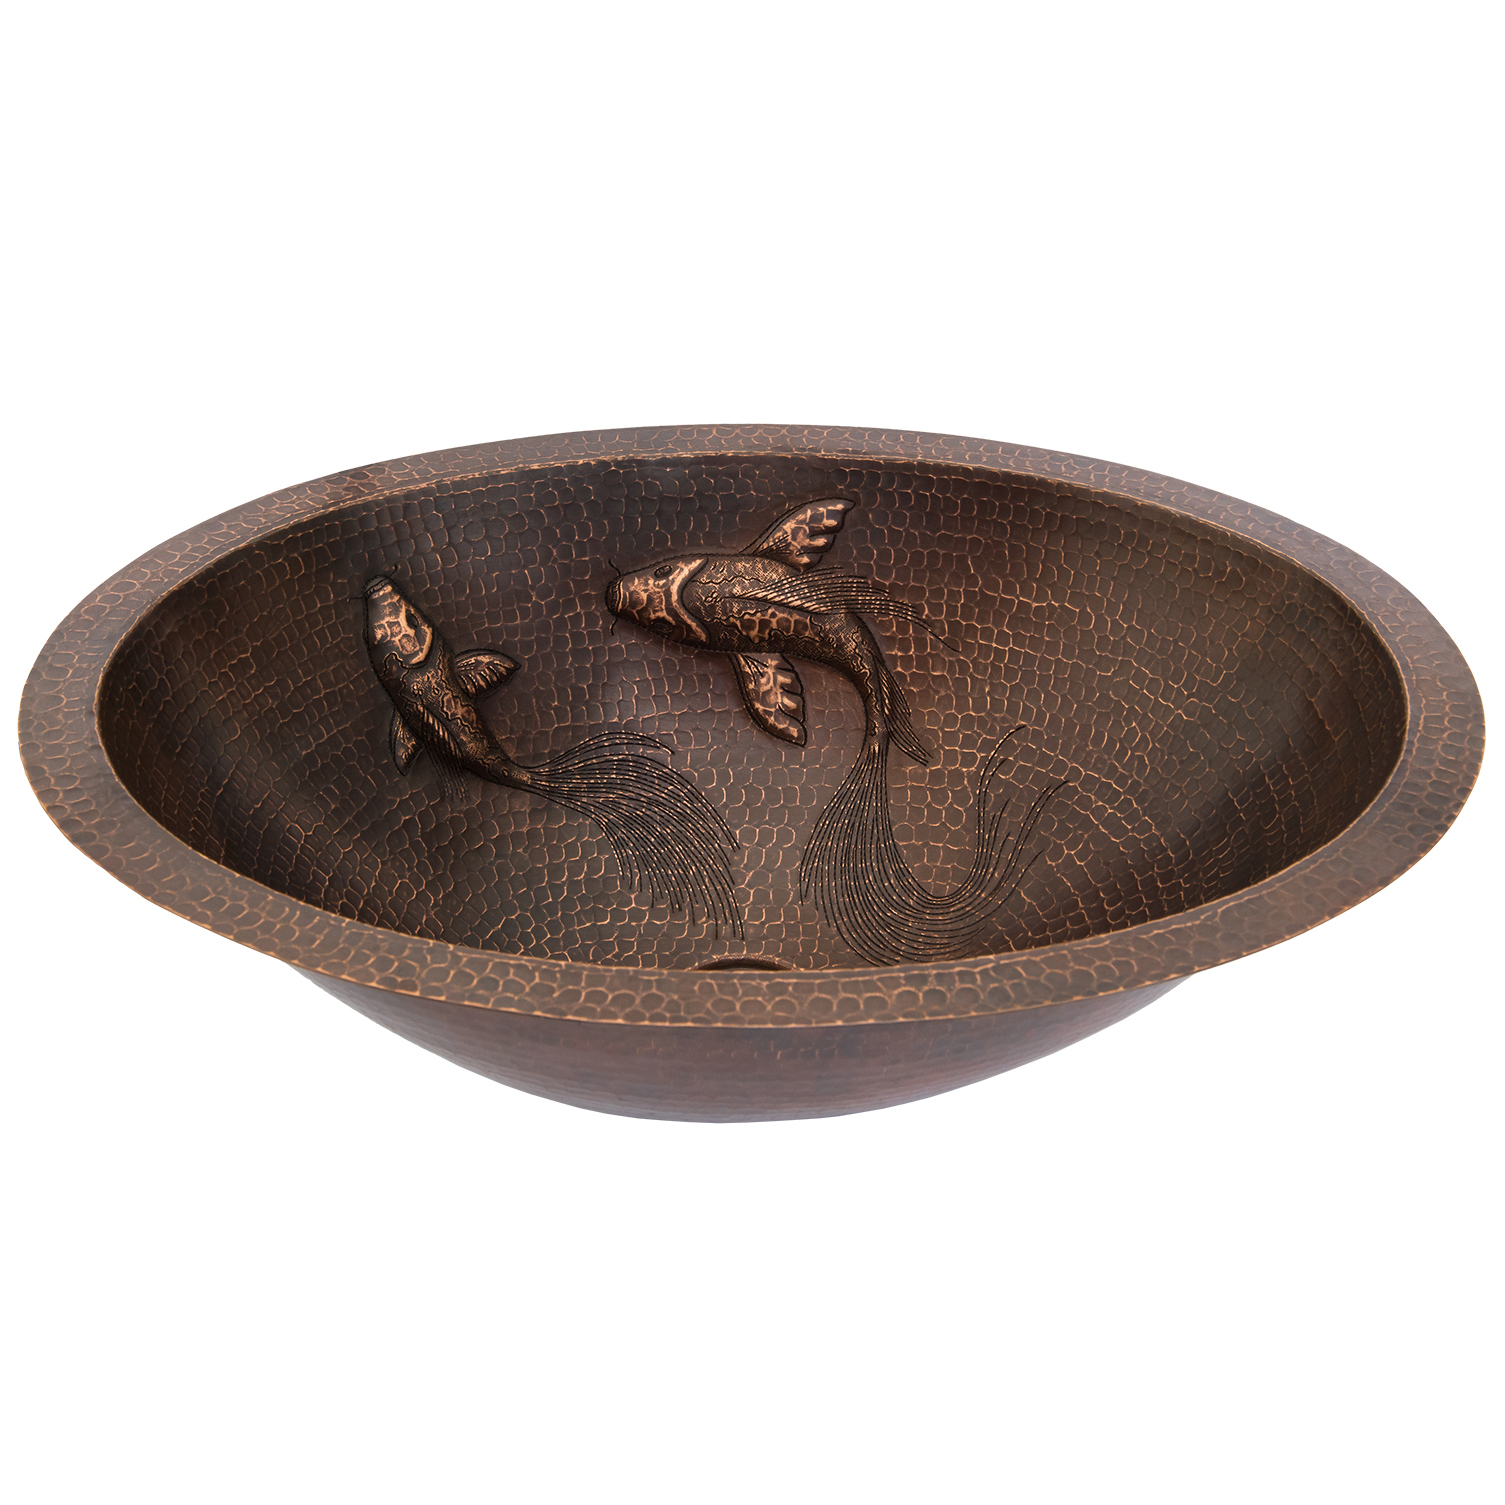 Oval Under Counter Hammered Copper Bathroom Sink With Two Small Koi Fish Design